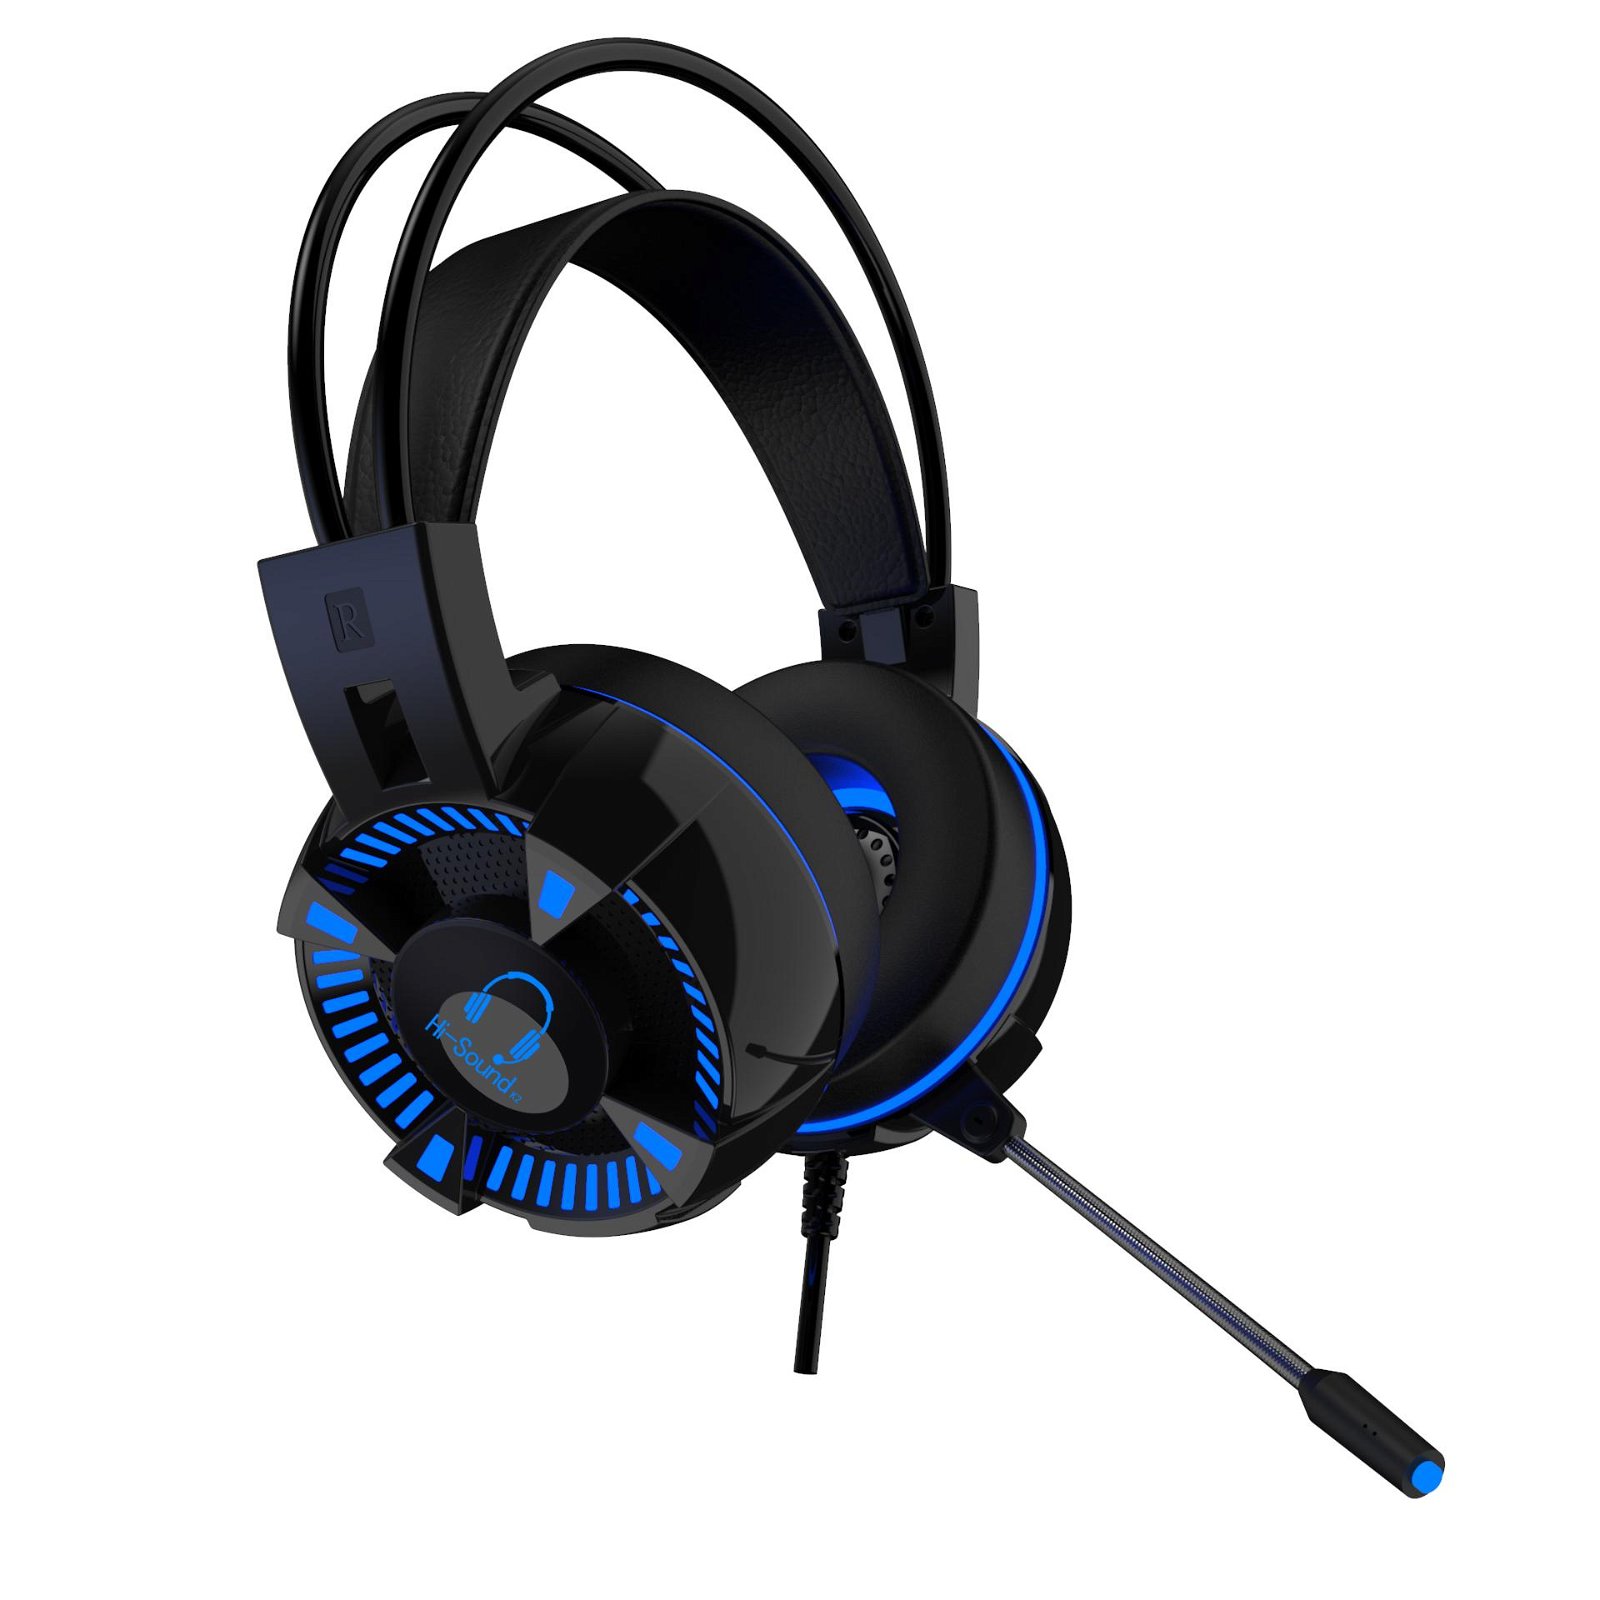 Hi-sound LED Cool Colorful LED Gaming Headset for gamers 3